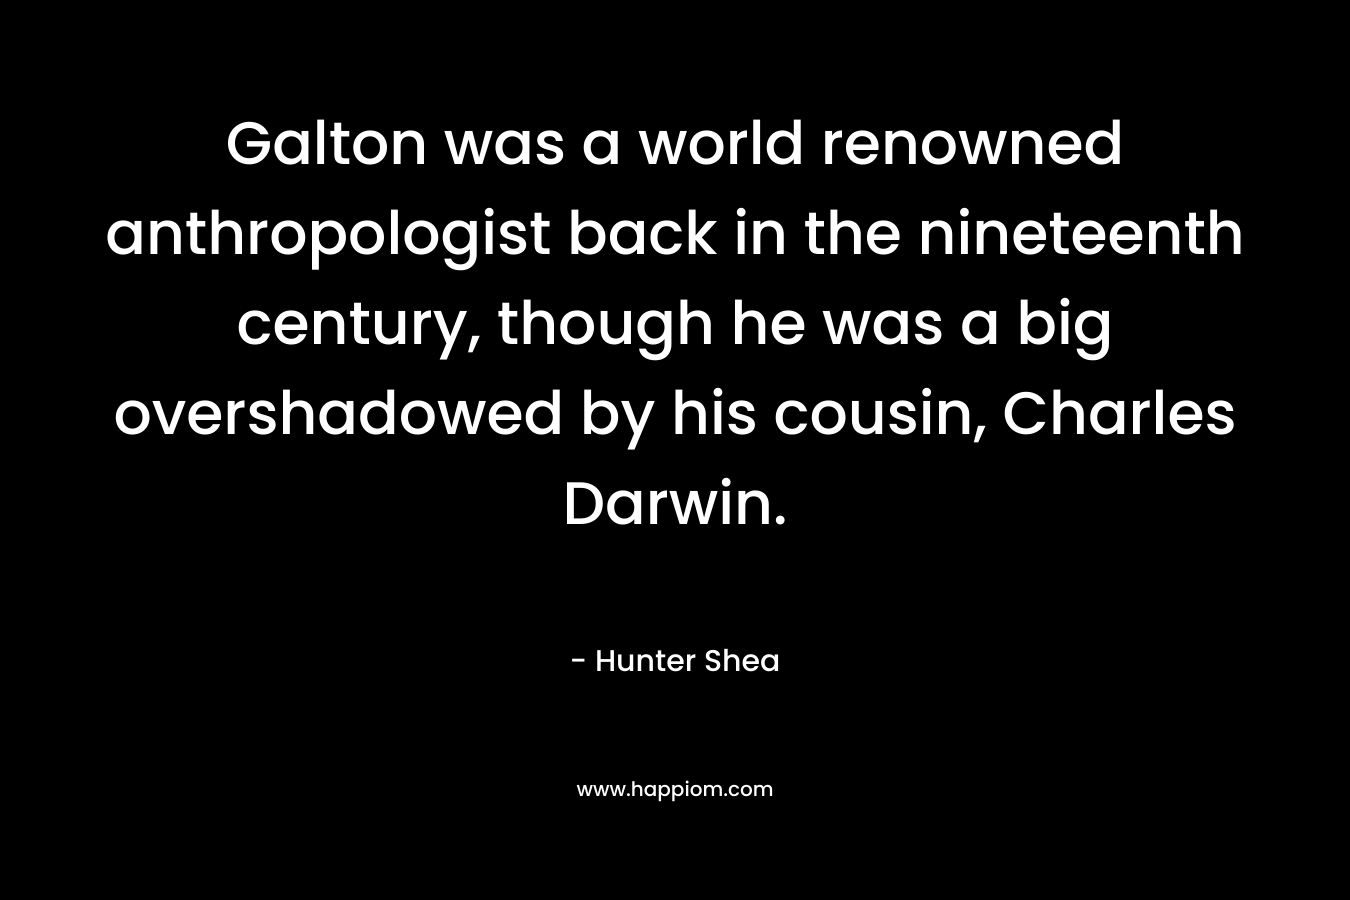 Galton was a world renowned anthropologist back in the nineteenth century, though he was a big overshadowed by his cousin, Charles Darwin.